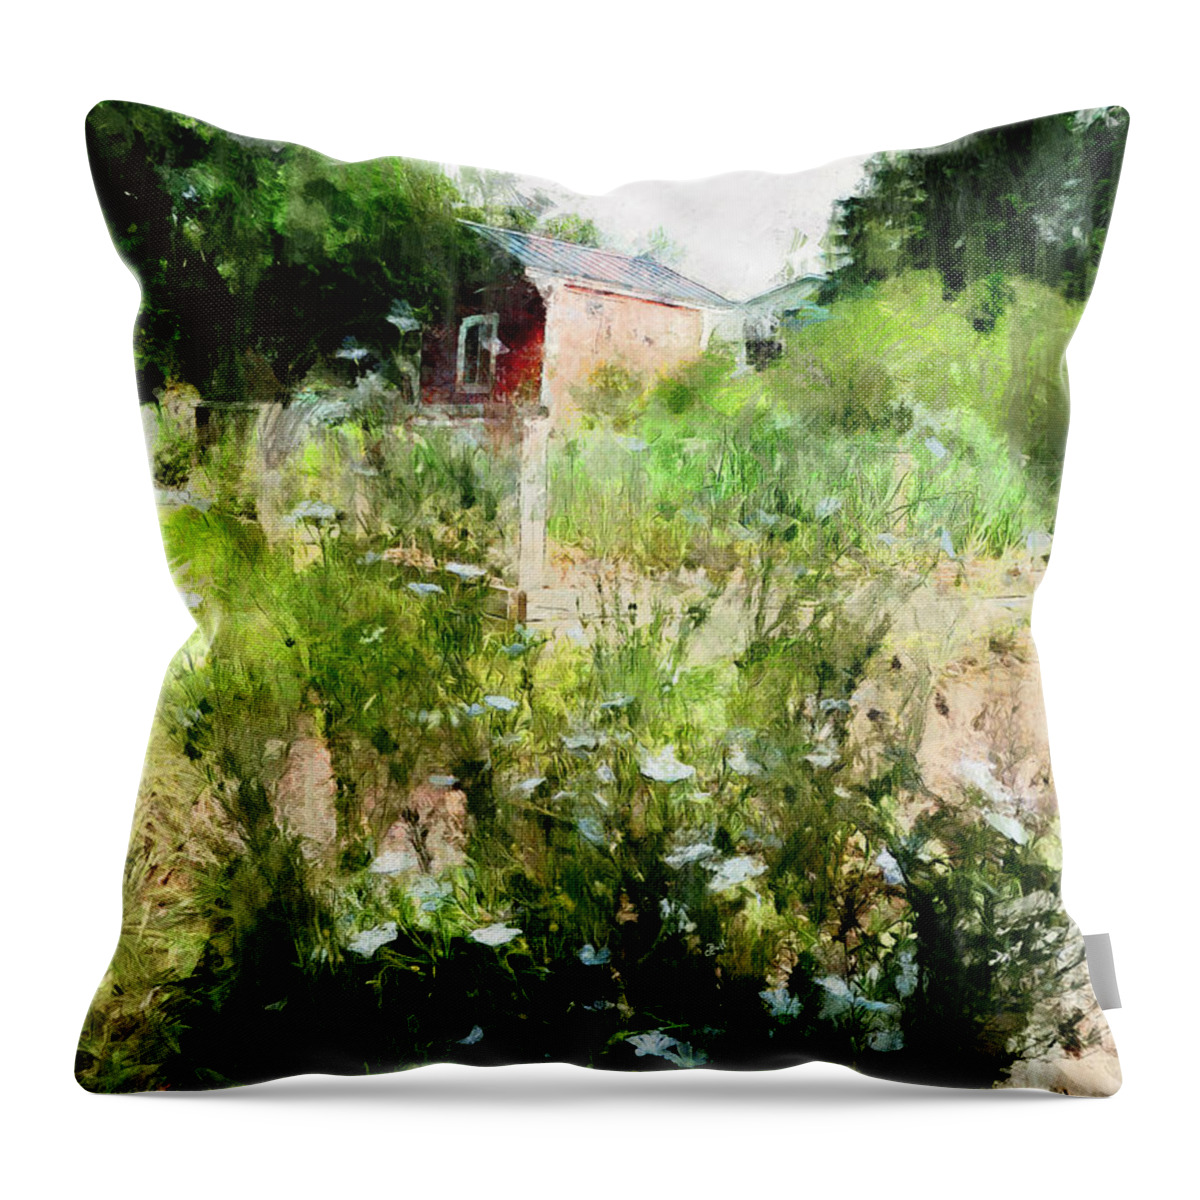 Roots Throw Pillow featuring the photograph New Roots by Claire Bull